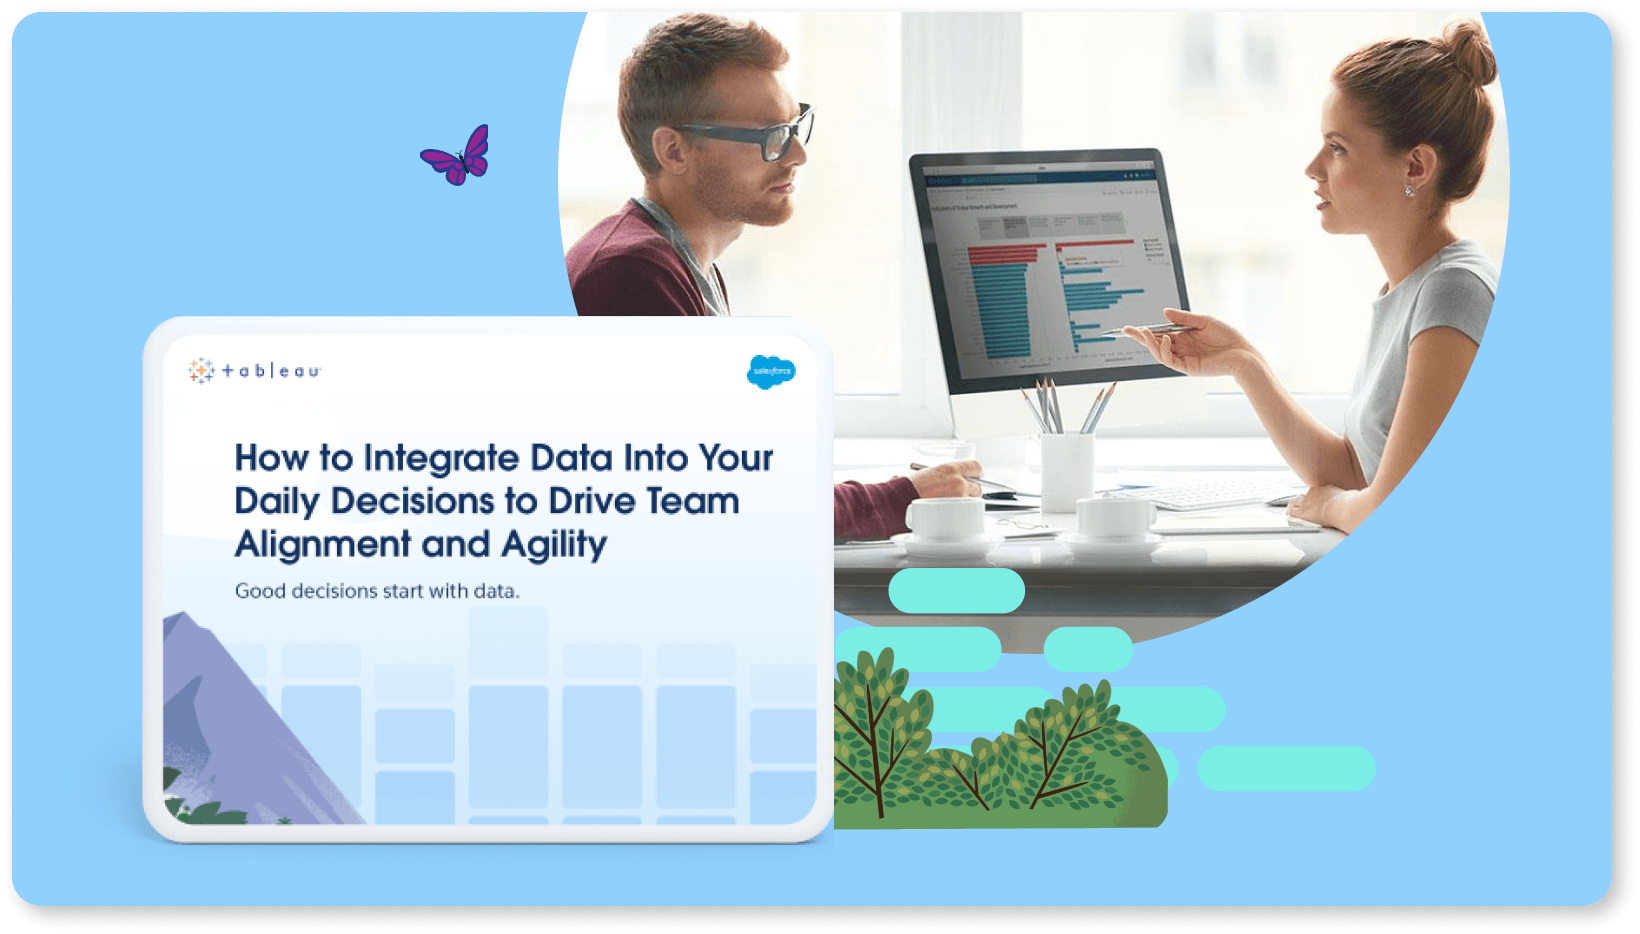 Ir a How to Integrate Data Into Your Daily Decisions to Drive Team Alignment and Agility